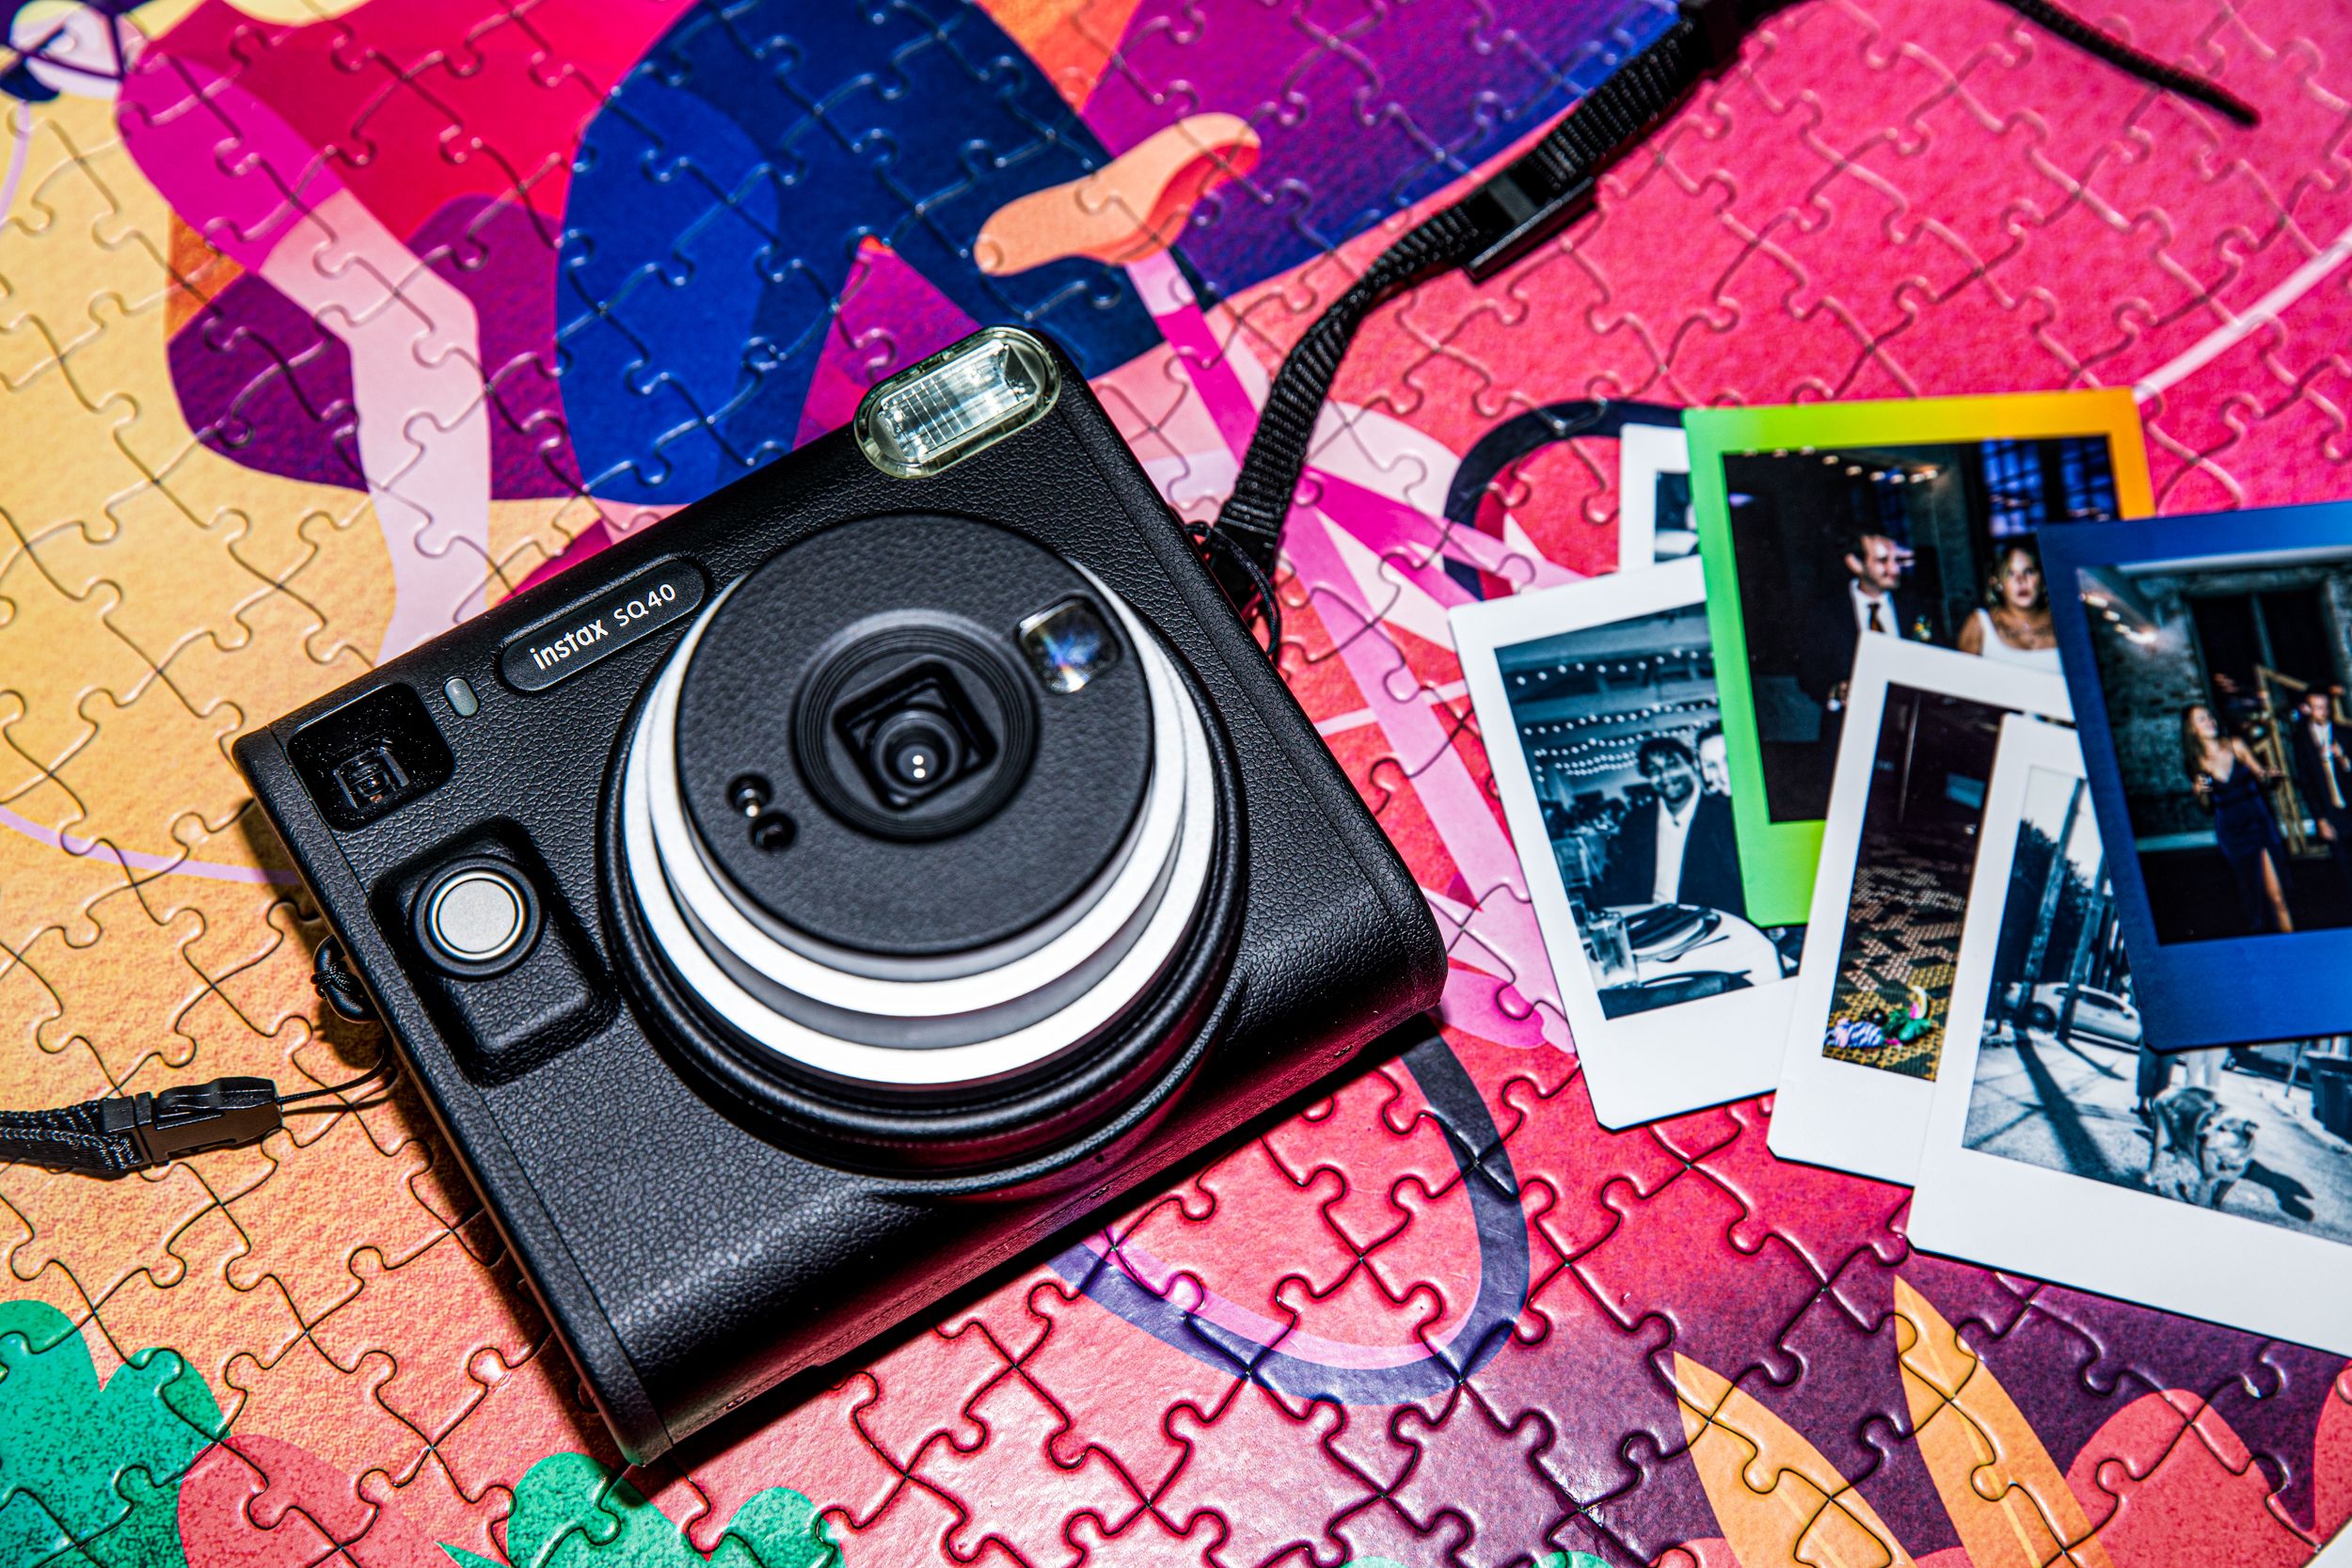 This Film Camera Shoots like a Disposable but Doesn't Hurt the